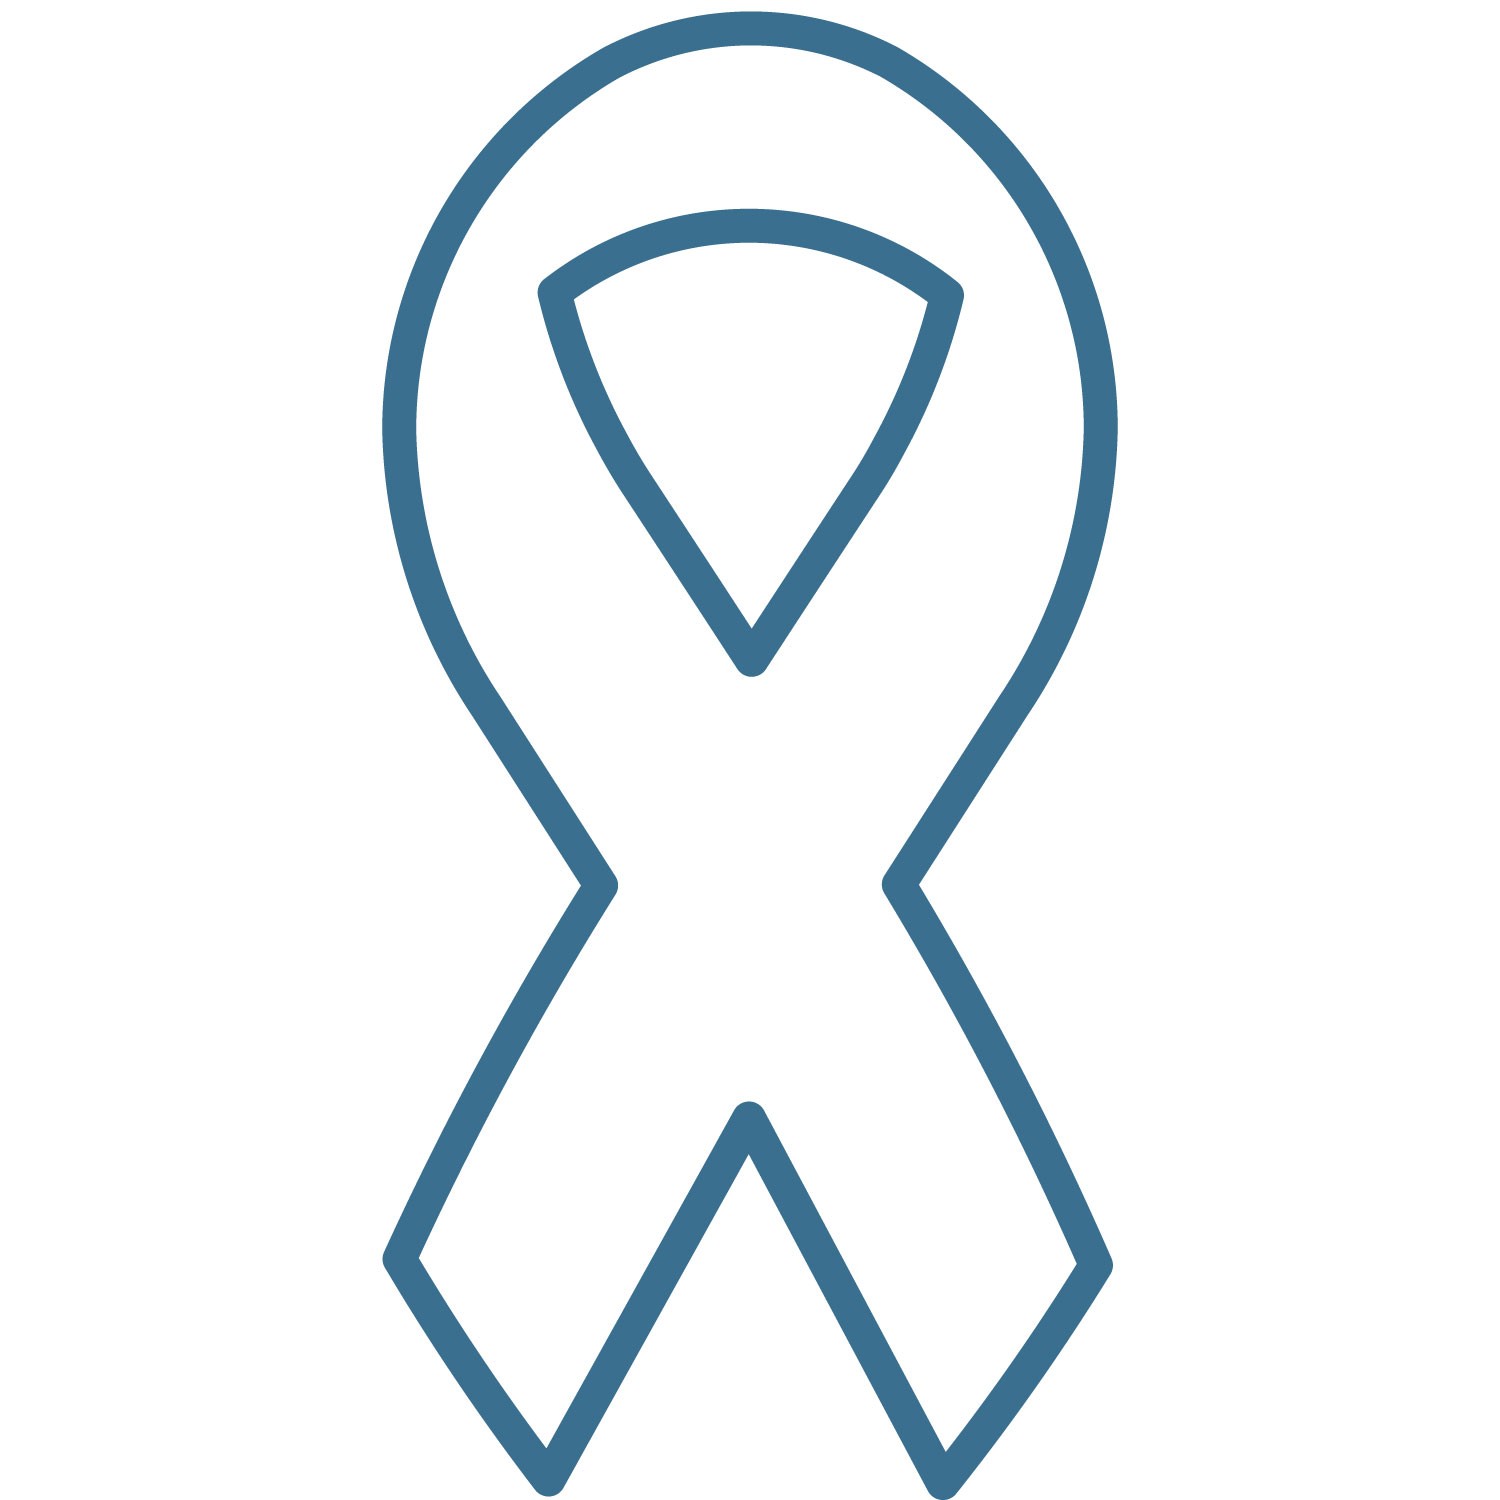 Awareness Ribbon Outline Cliparts co